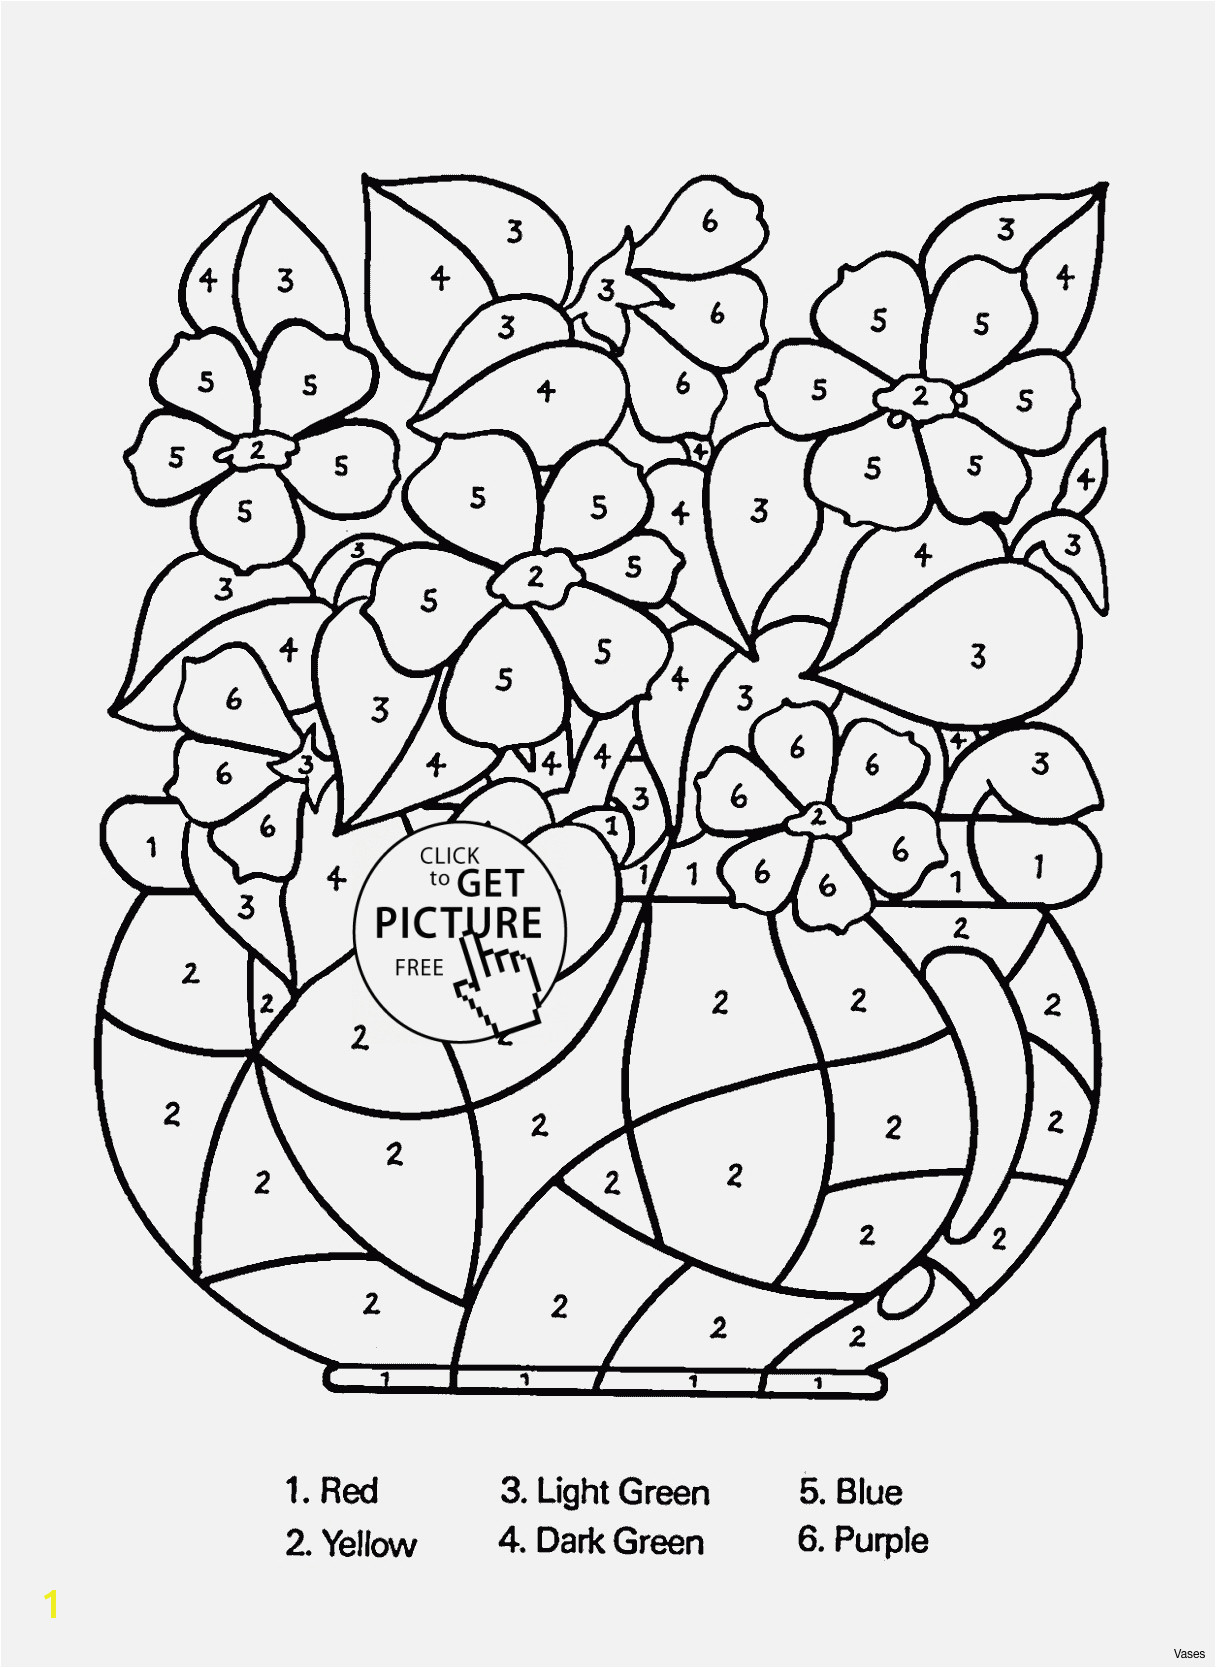 Ice Cream Coloring Pages Coloring & Activity Awesome Coloring Sheet for Black Design